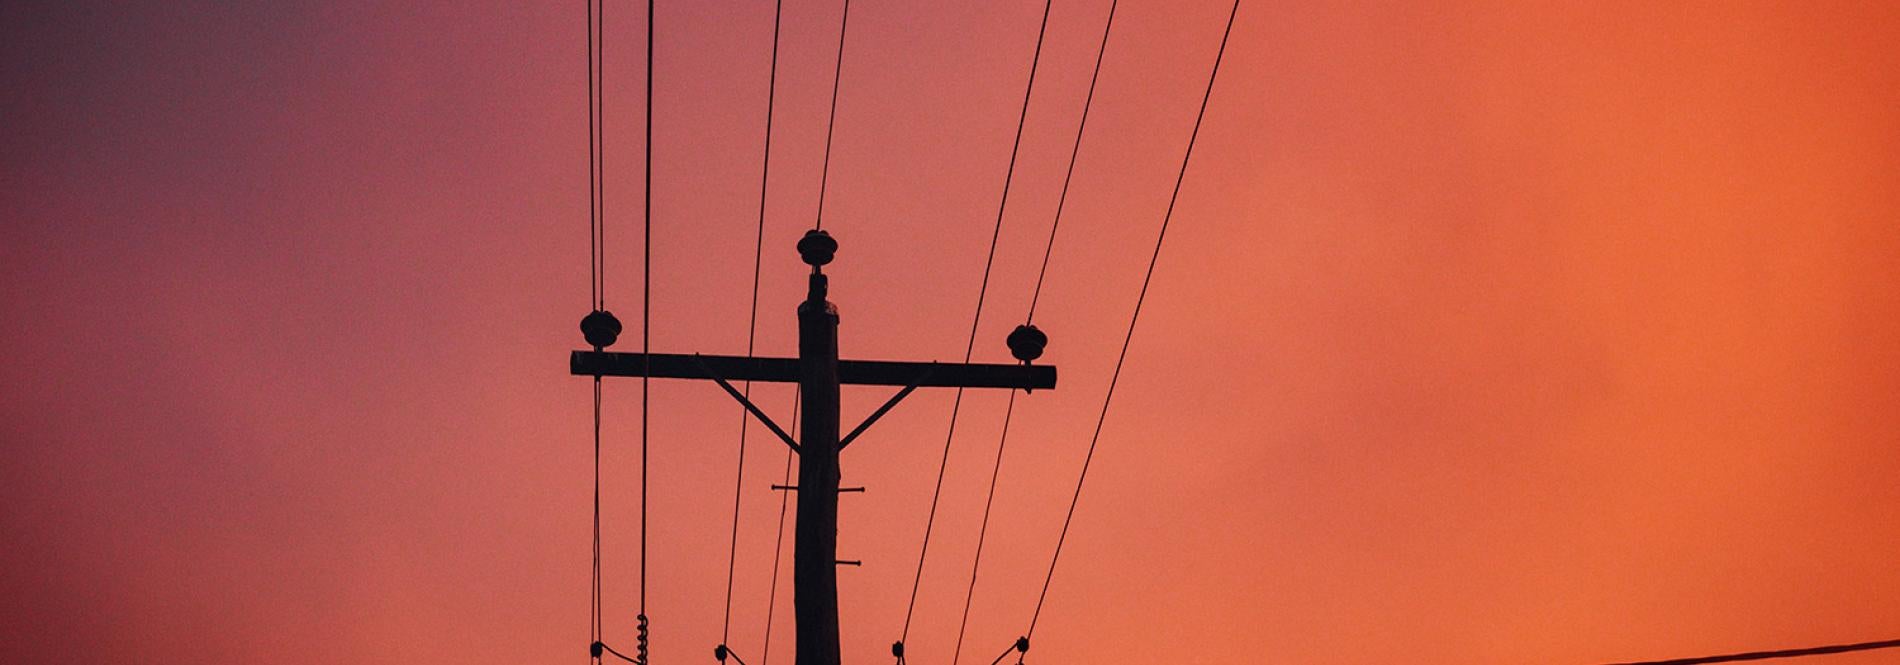 I Hit a Power Pole or Other Electrical Equipment: Now What? 